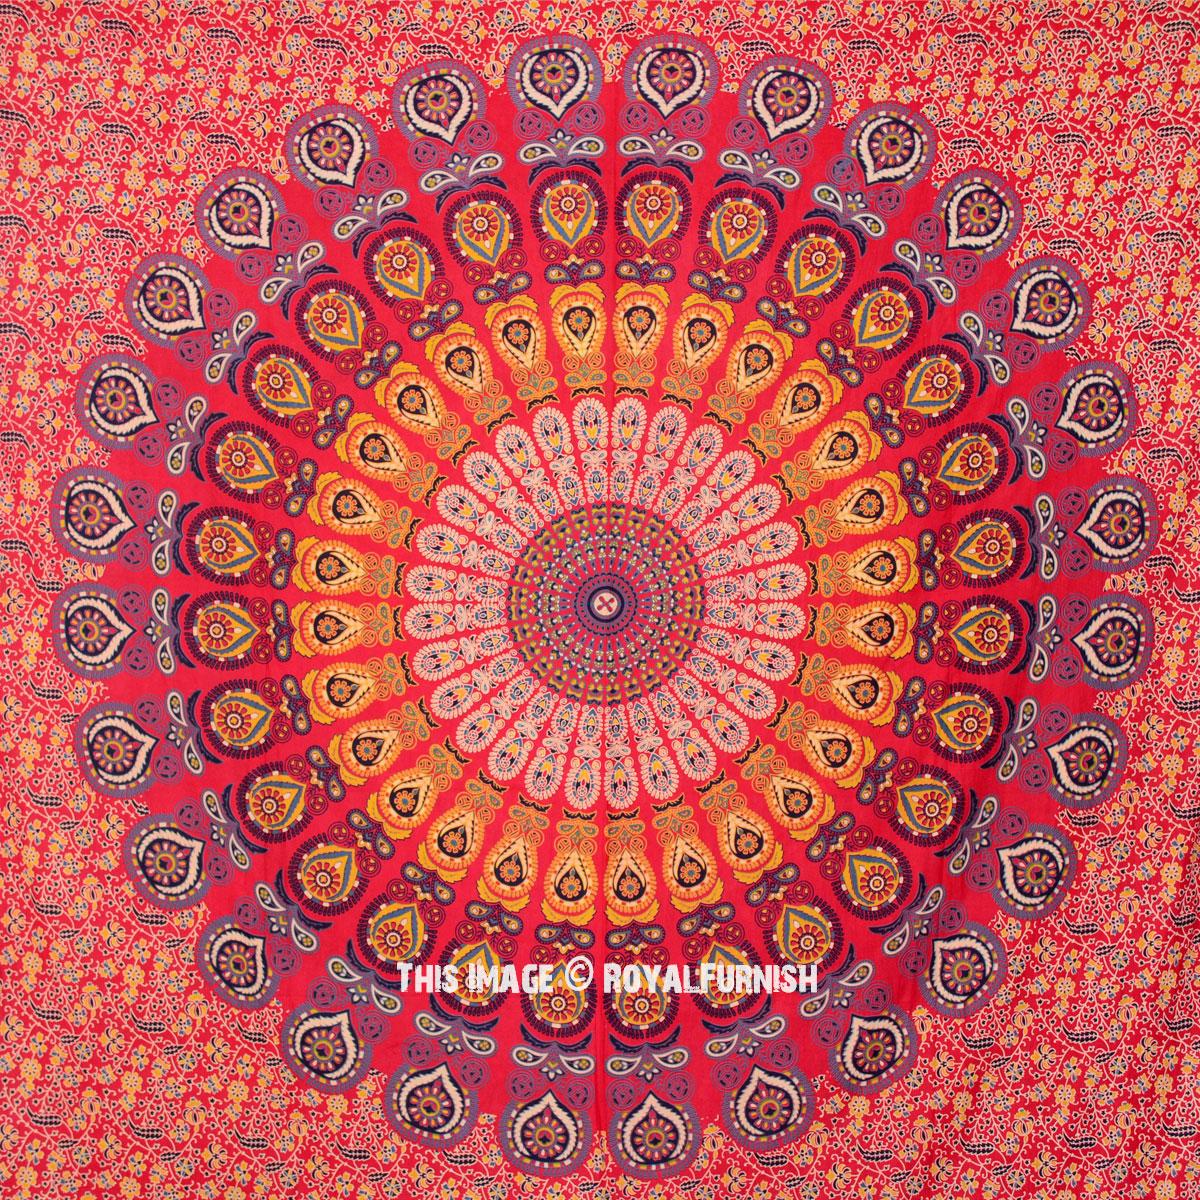 Bright Mandala Floral Tapestry Hippie Red Psychedelic Bedspread